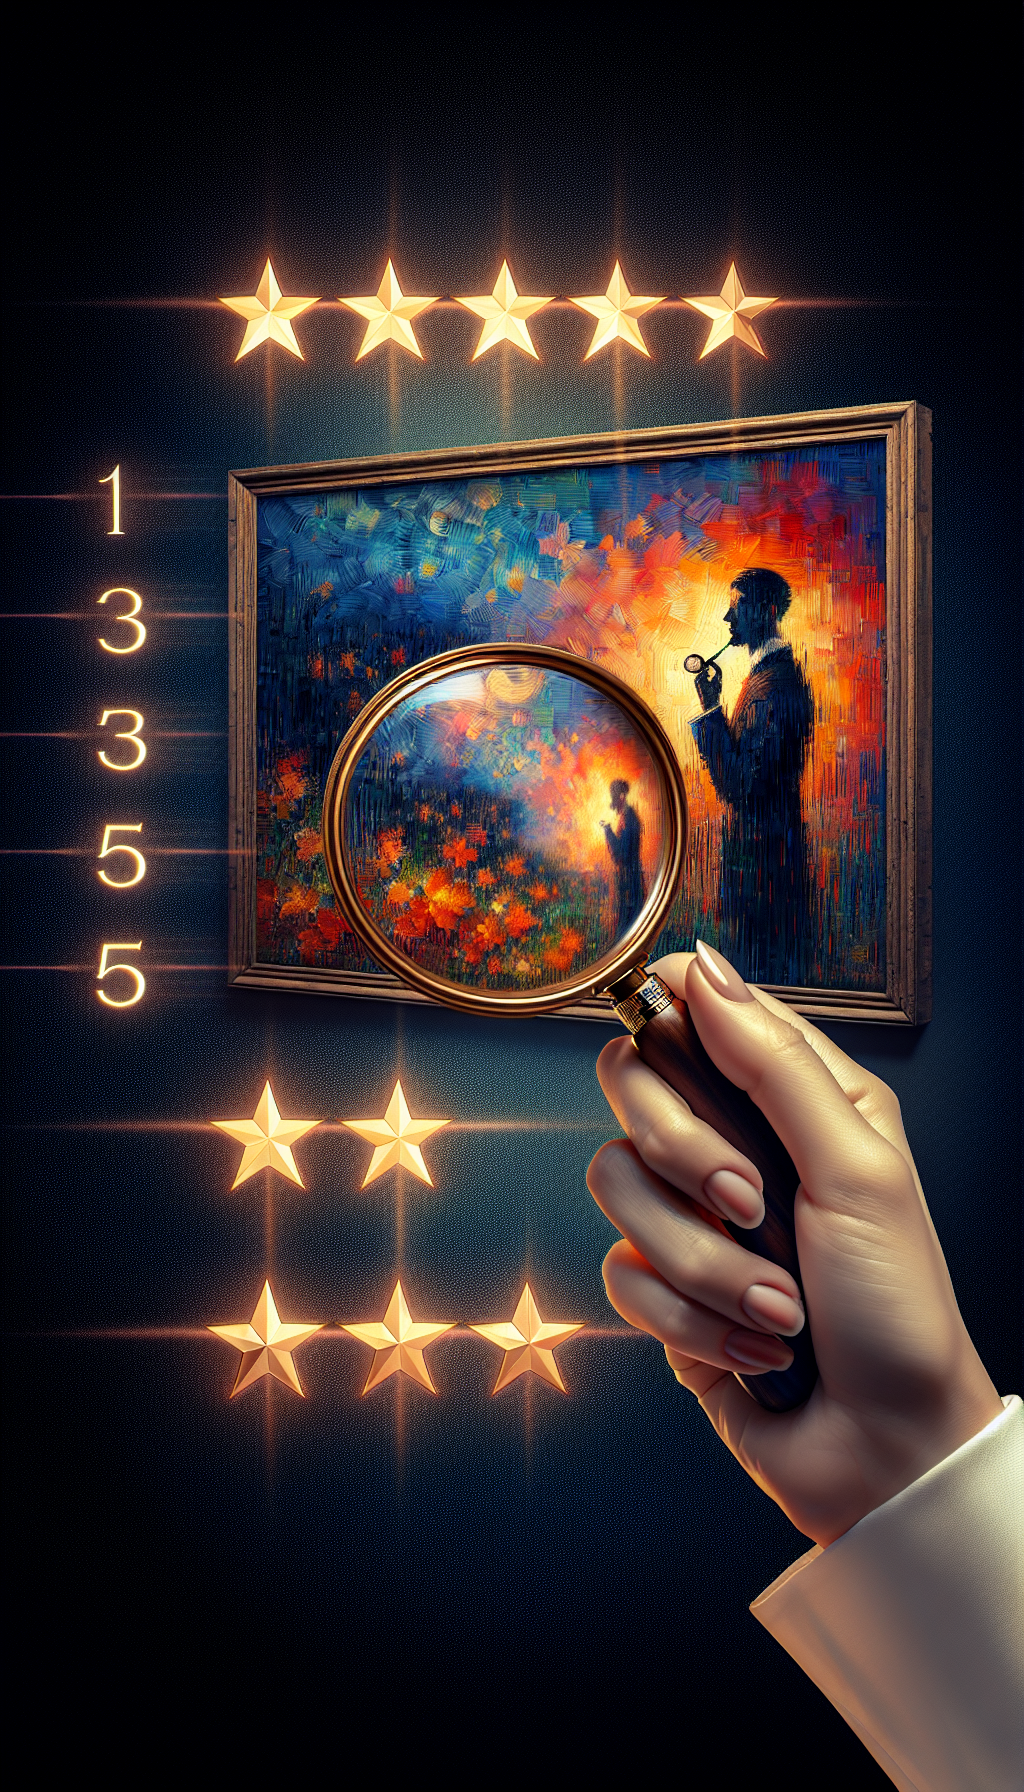 An elegant hand holding a magnifying glass that carefully examines a vibrant, impressionist canvas while a row of numbered stars from one to five—a nod to the '5 Appraisal Essentials'—shimmer above. The reflection in the glass reveals a silhouette wearing a monocle, symbolizing the expert gaze of a qualified fine art appraiser.